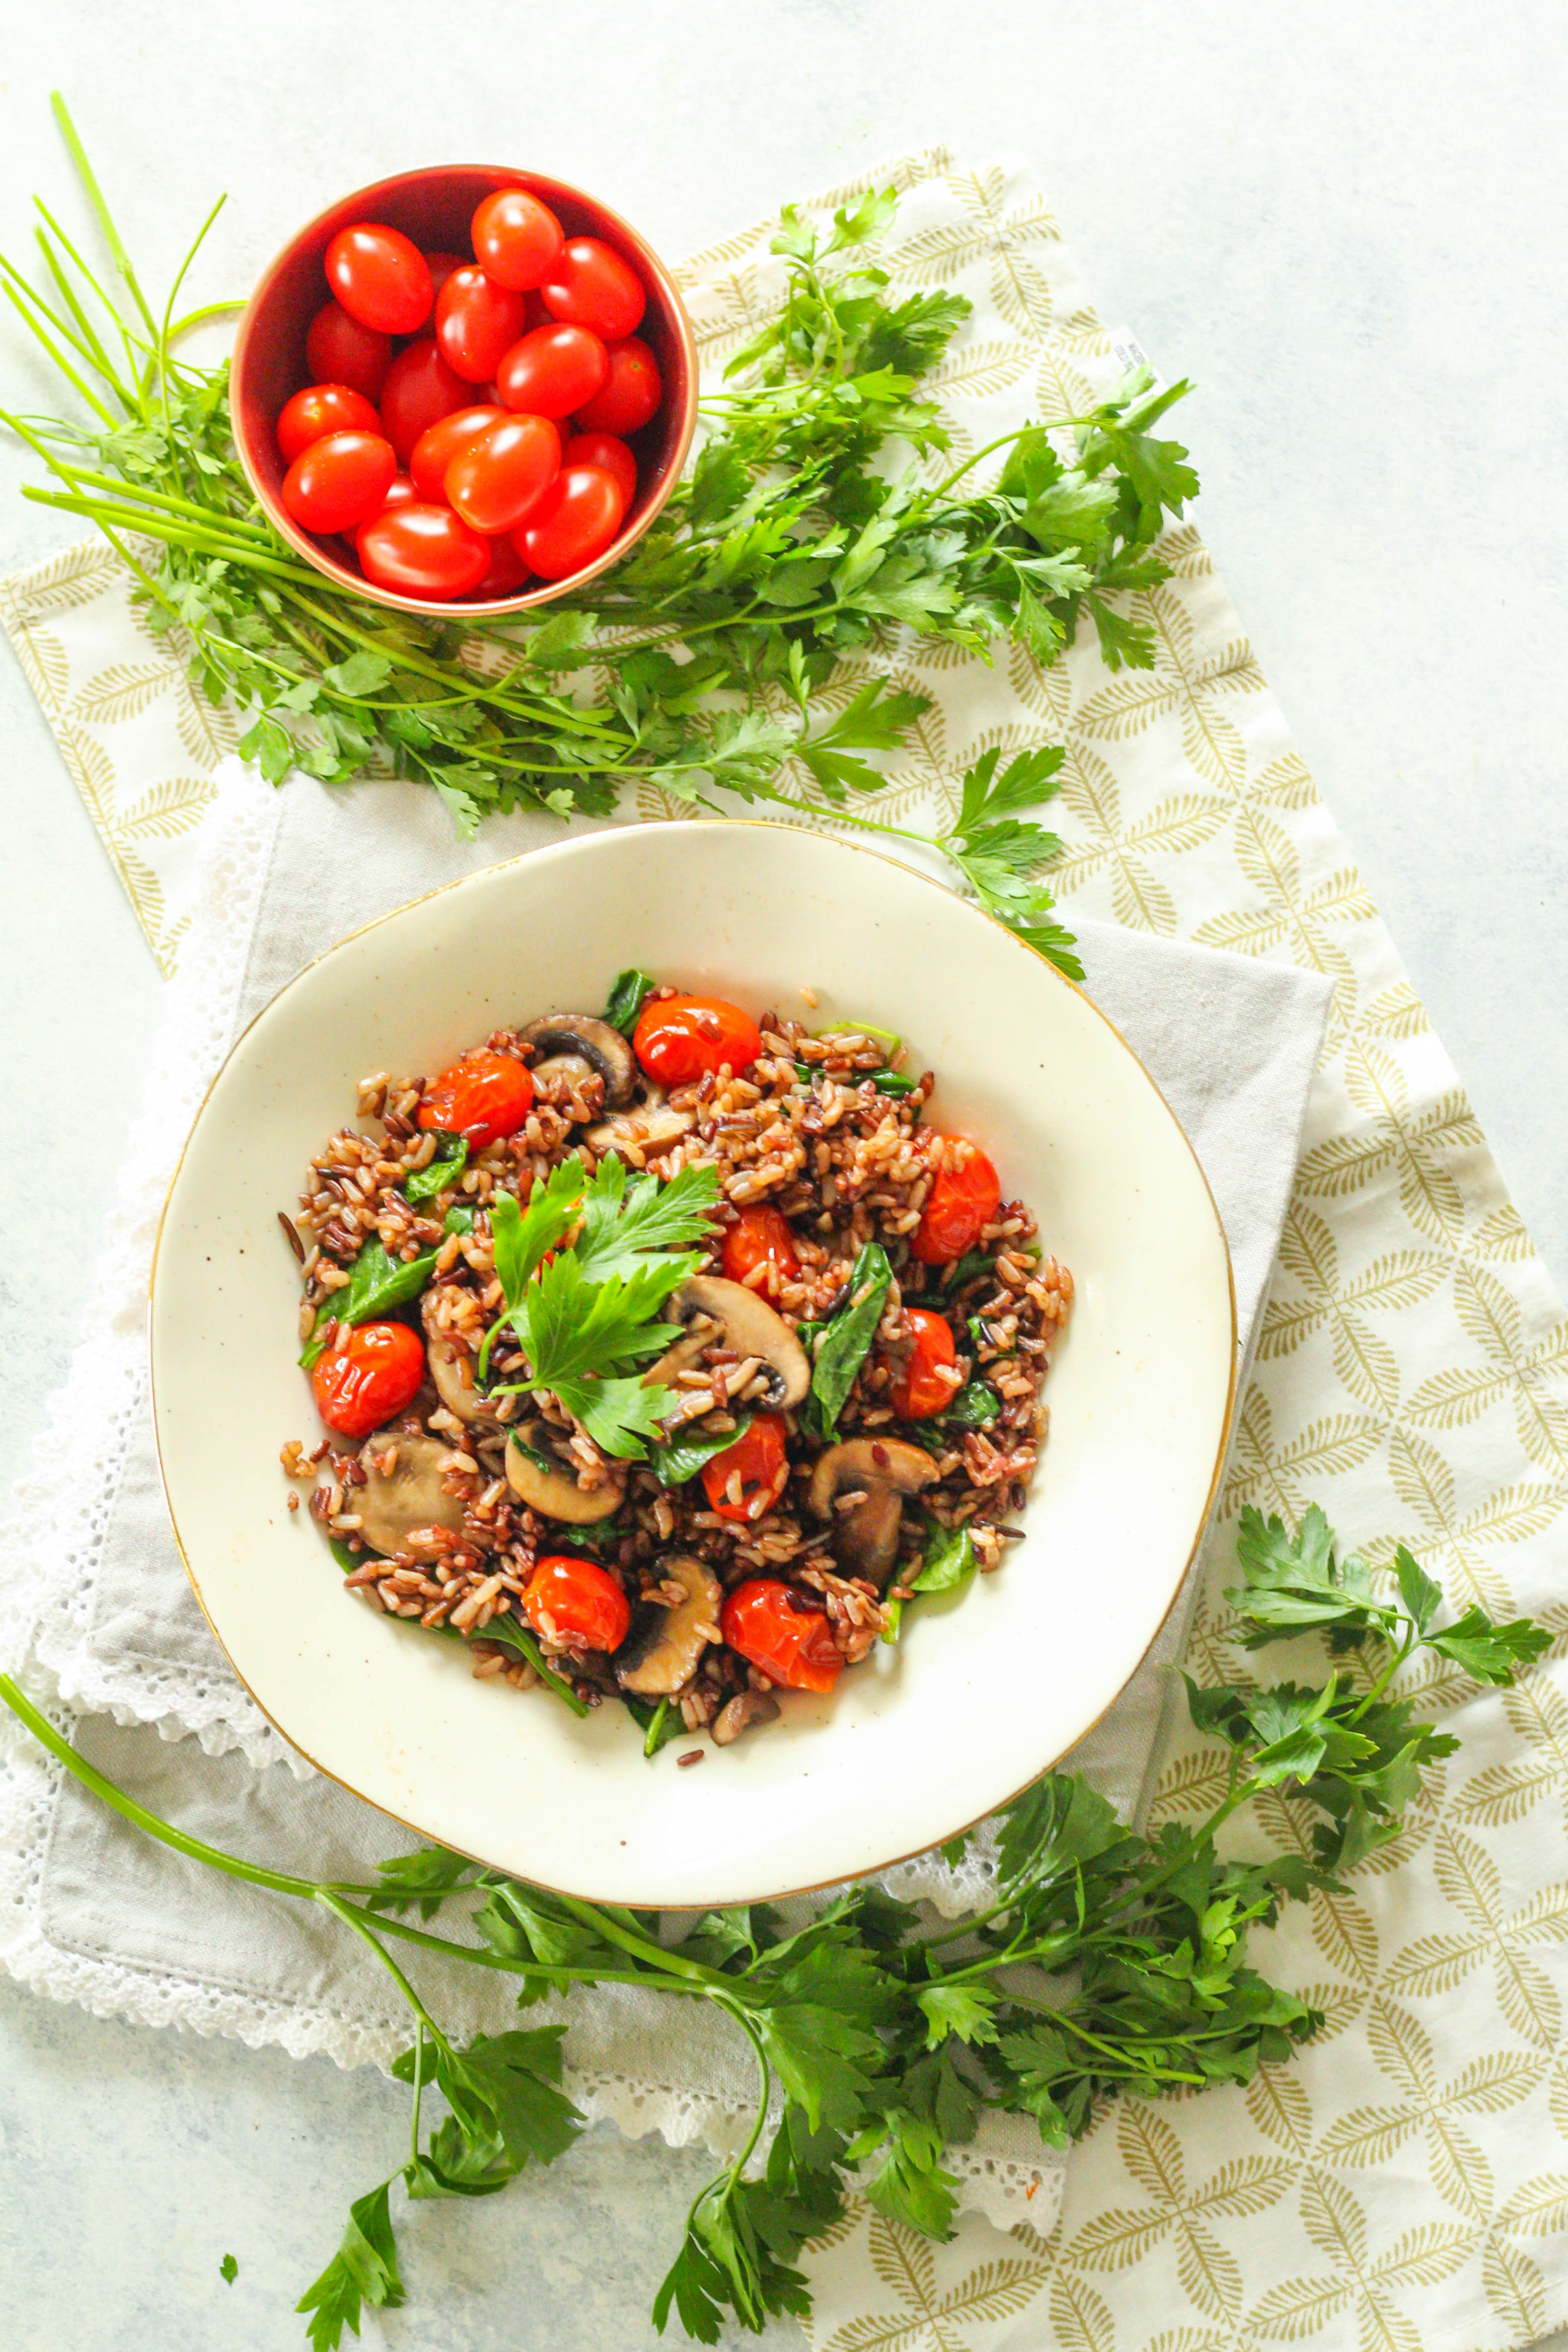 Delicious and filling, this Instant Pot Wild Rice Bowl is a comforting weeknight meal that won't heat up your kitchen in the summer months. Full of warm-weather flavors like baby spinach, burst sweet cherry tomatoes, and the addition of umami flavor from mushrooms. 